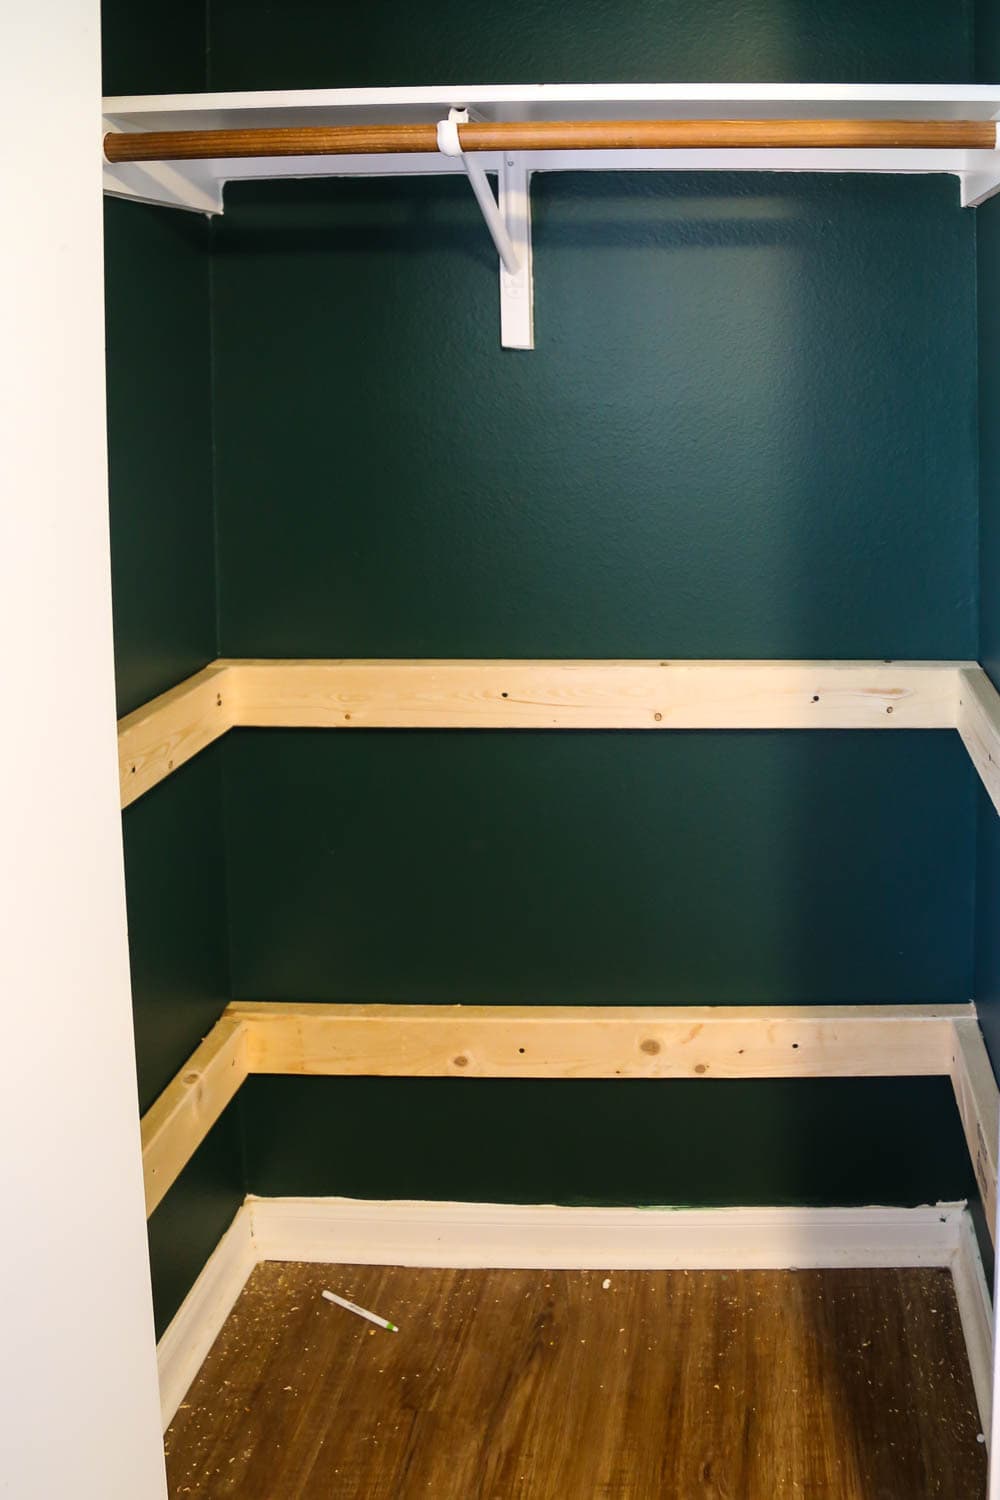 support boards for closet shelving